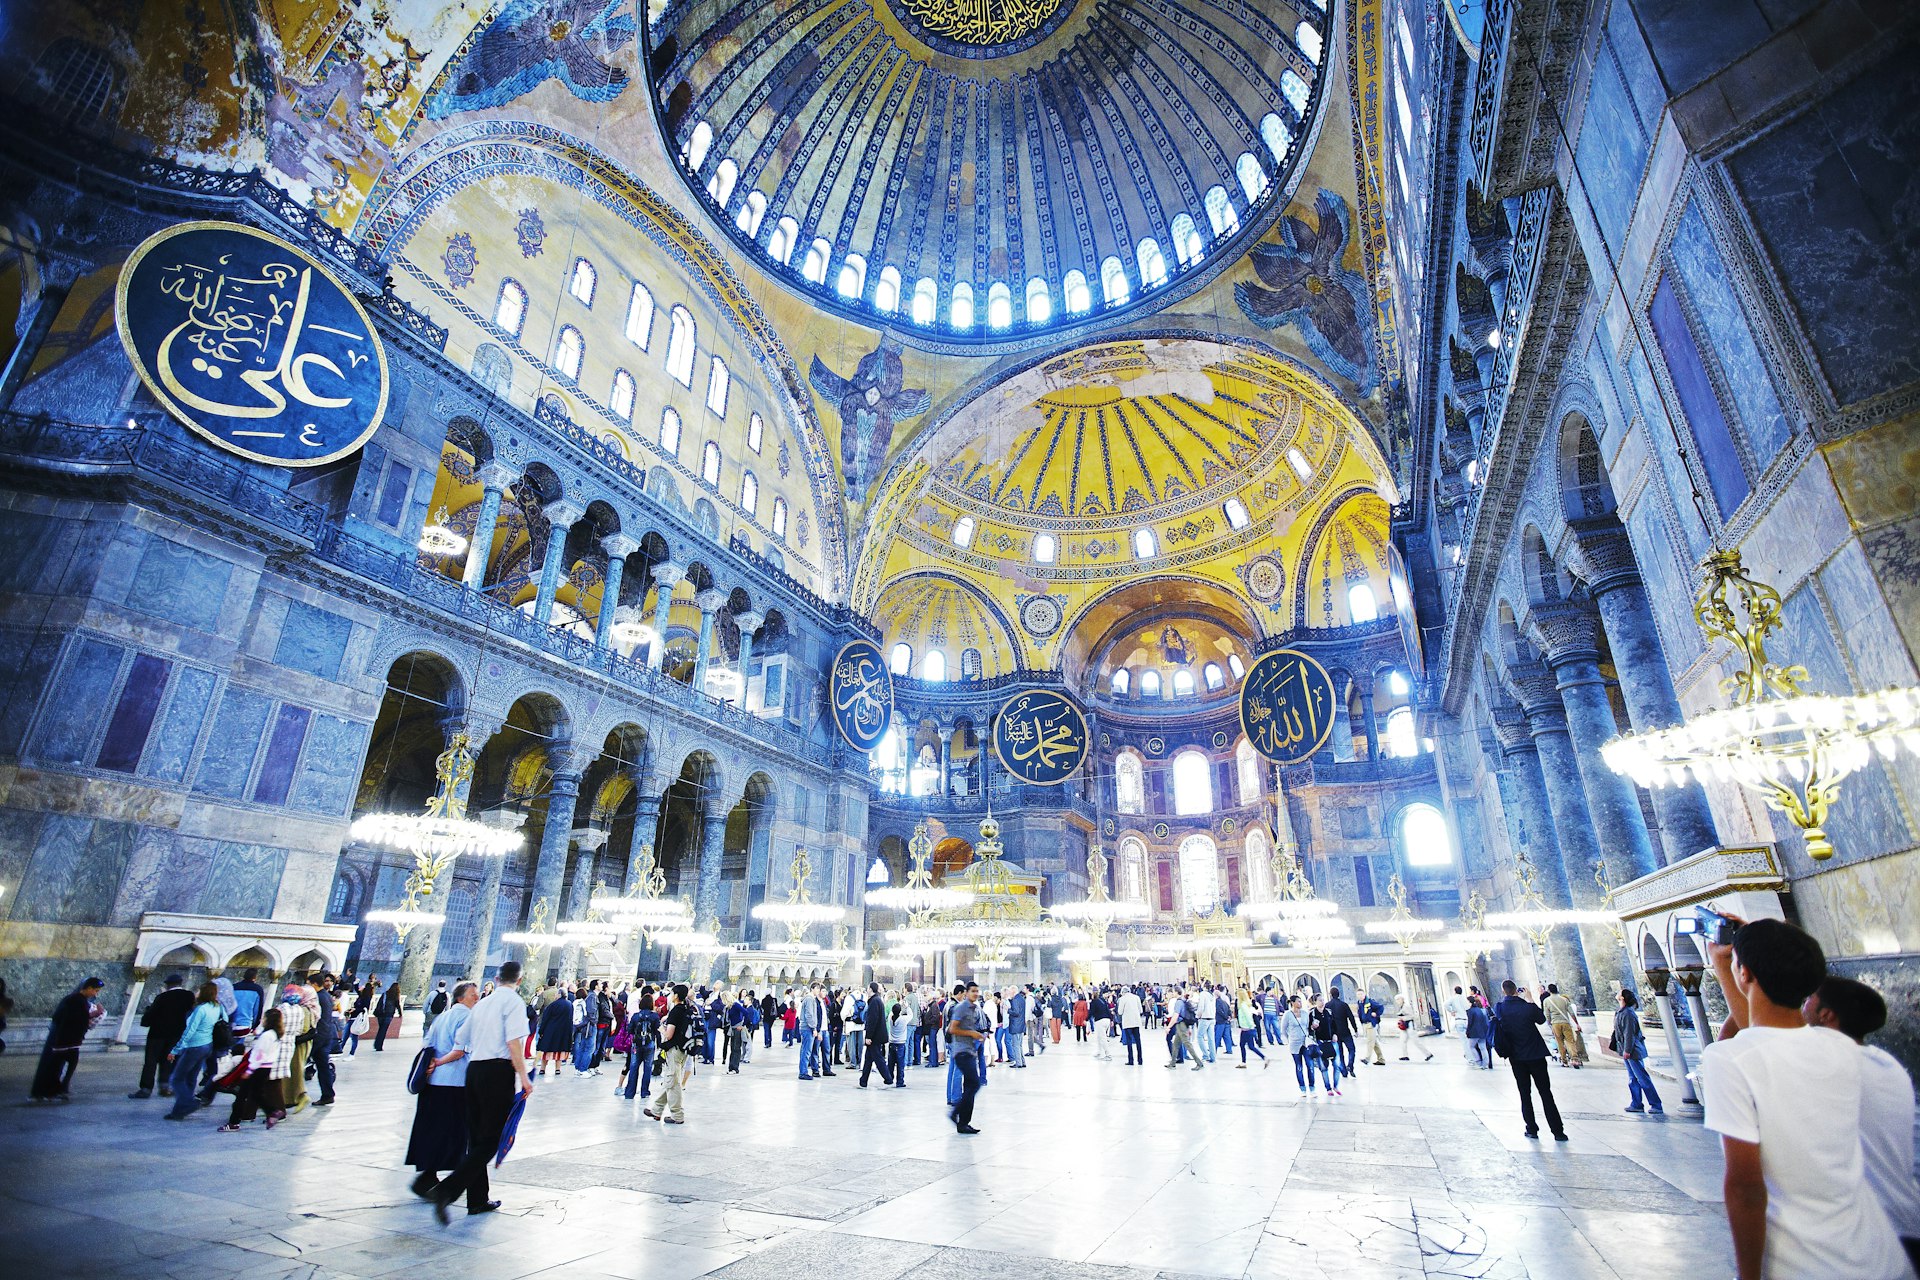 The light blue interior of Aya Sofya is highlighted with golden accents throughout the structure. There are large blue and gold signs attached to pillars around the building.